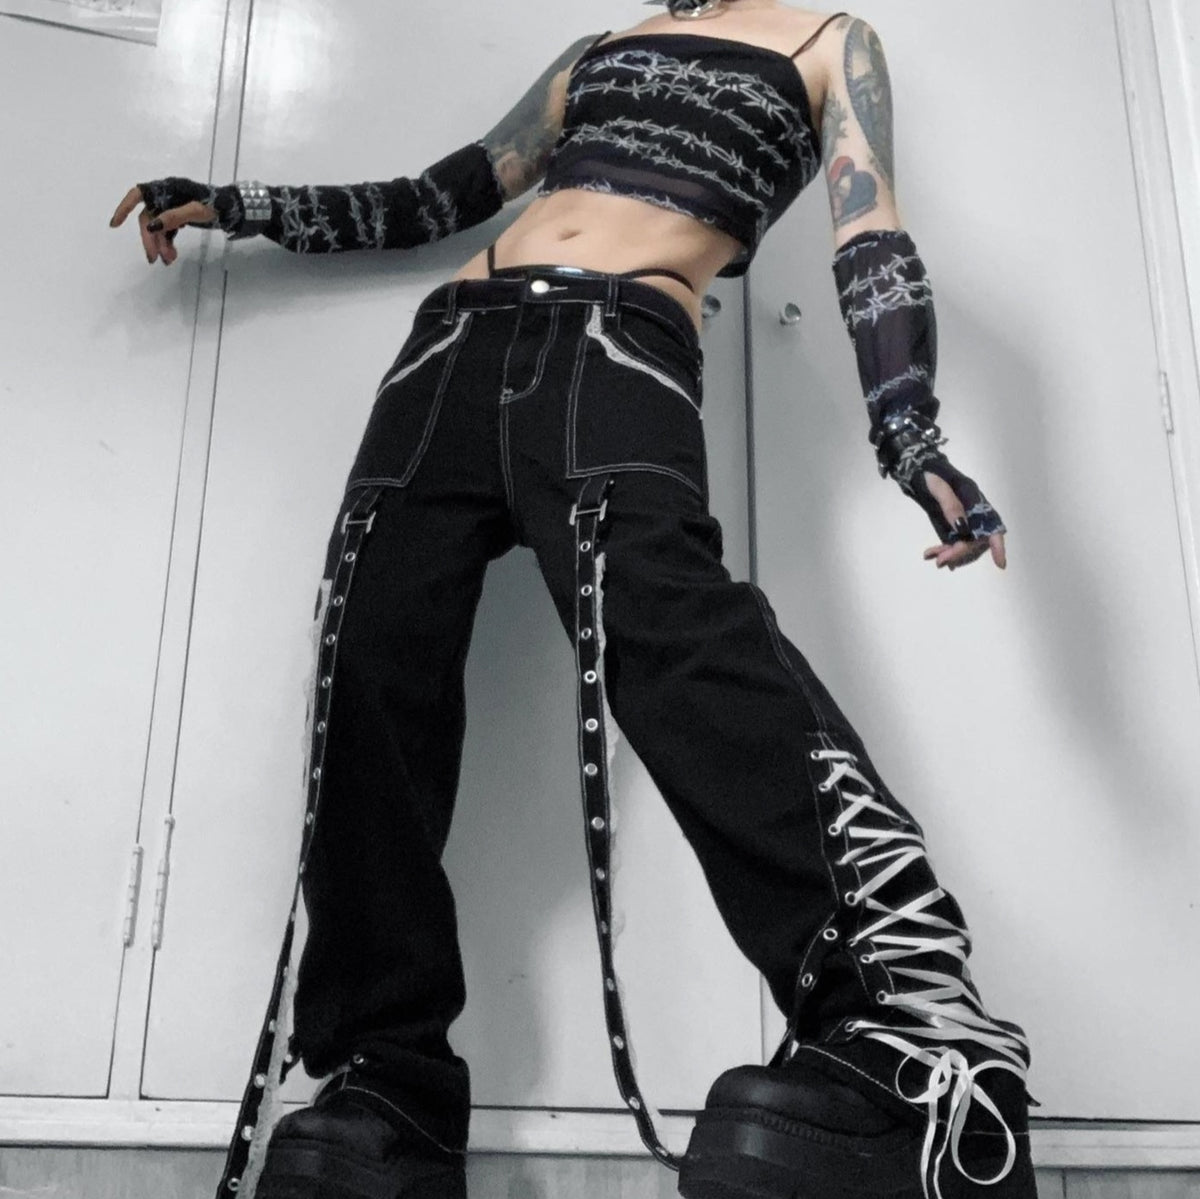 'Frost Bite' Black and White Lace Up Baggy Grunge Goth Pants